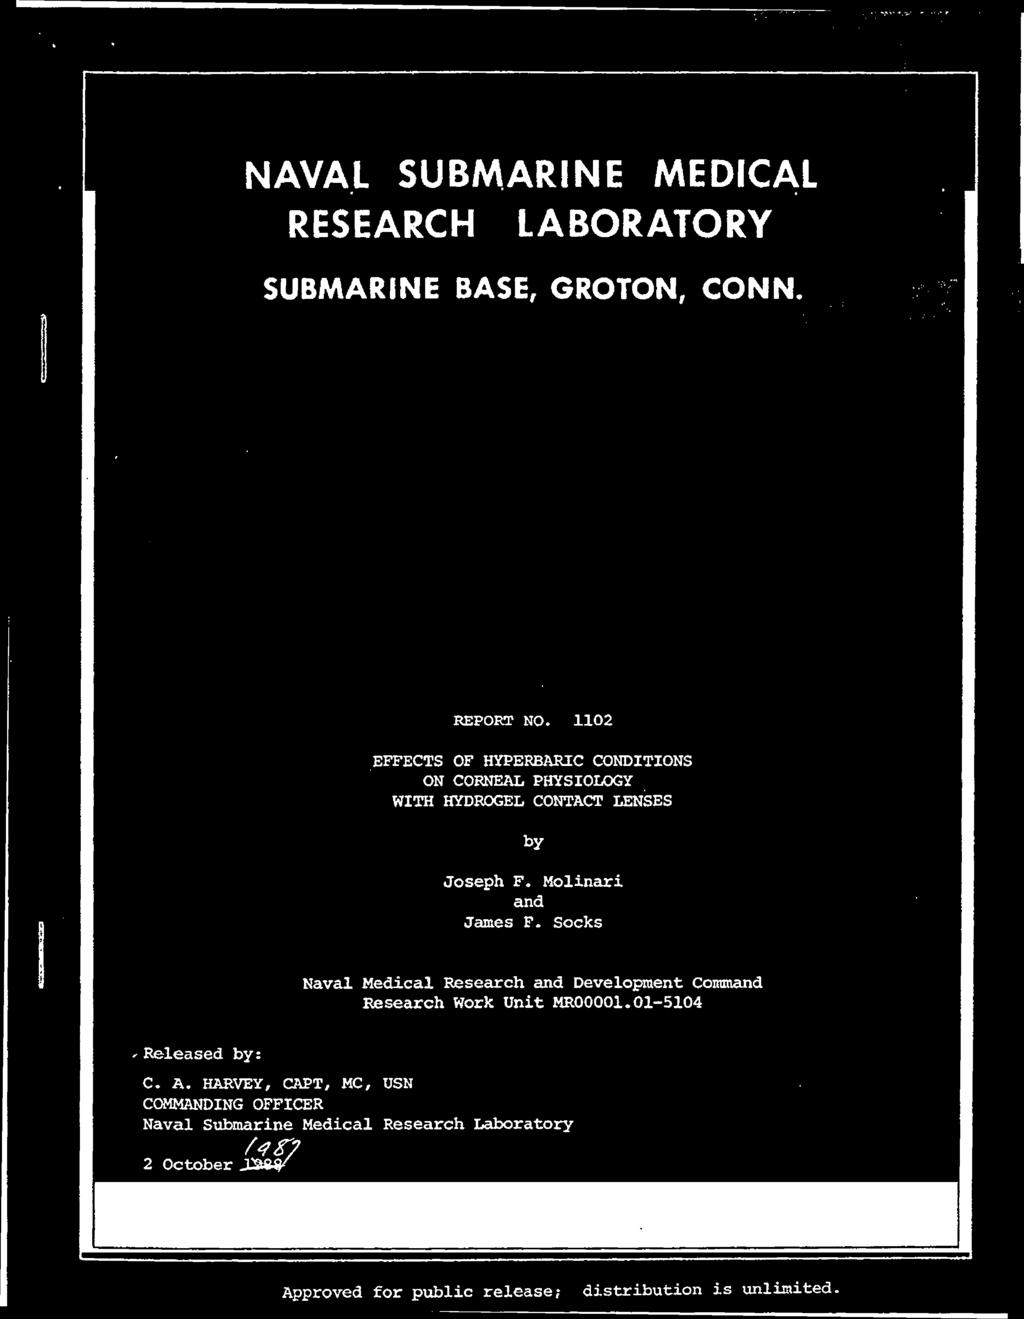 Molinari and James F. Socks Naval Medical Research and Development Command Research Work Unit MR00001.